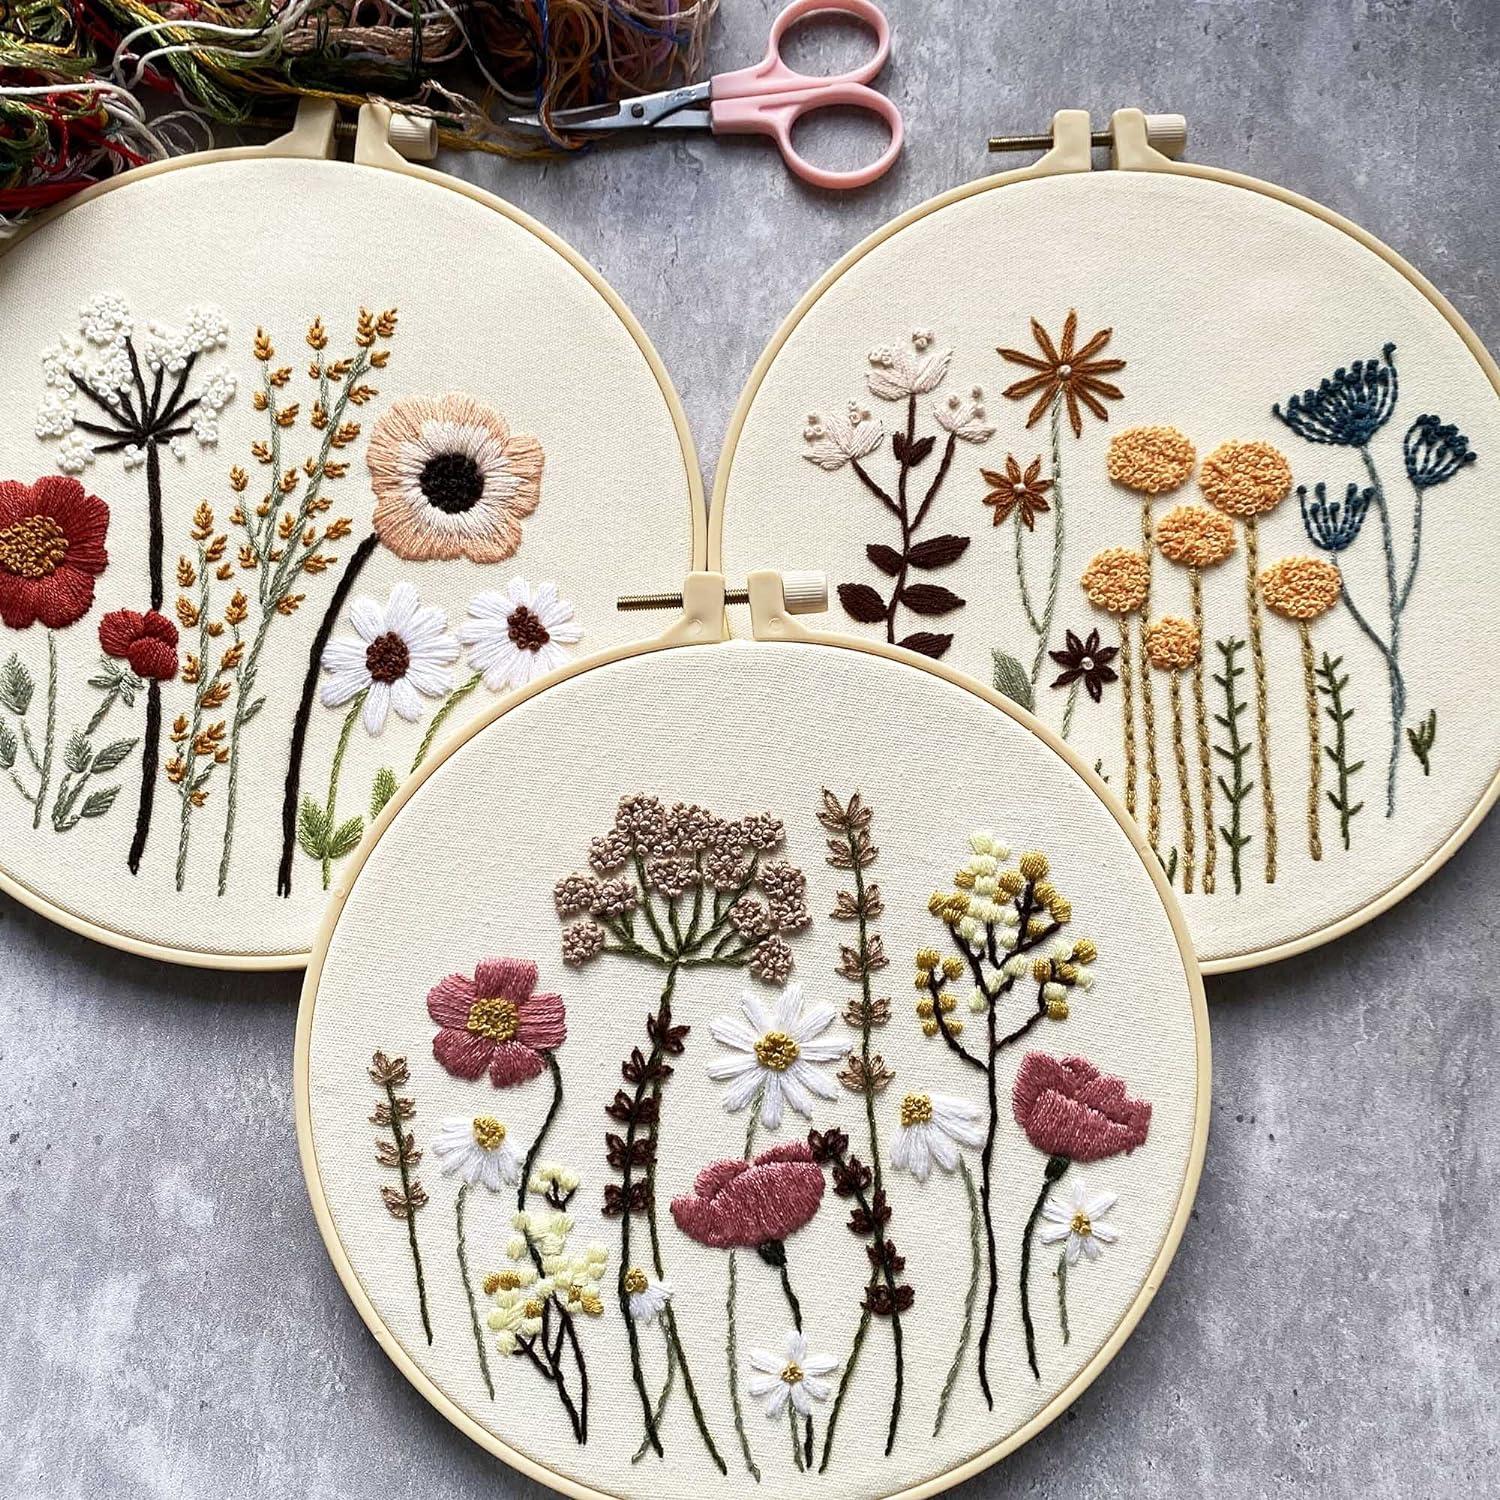 Embroidery Kit Flowers Plants Pattern With Hoop Printed Embroidery